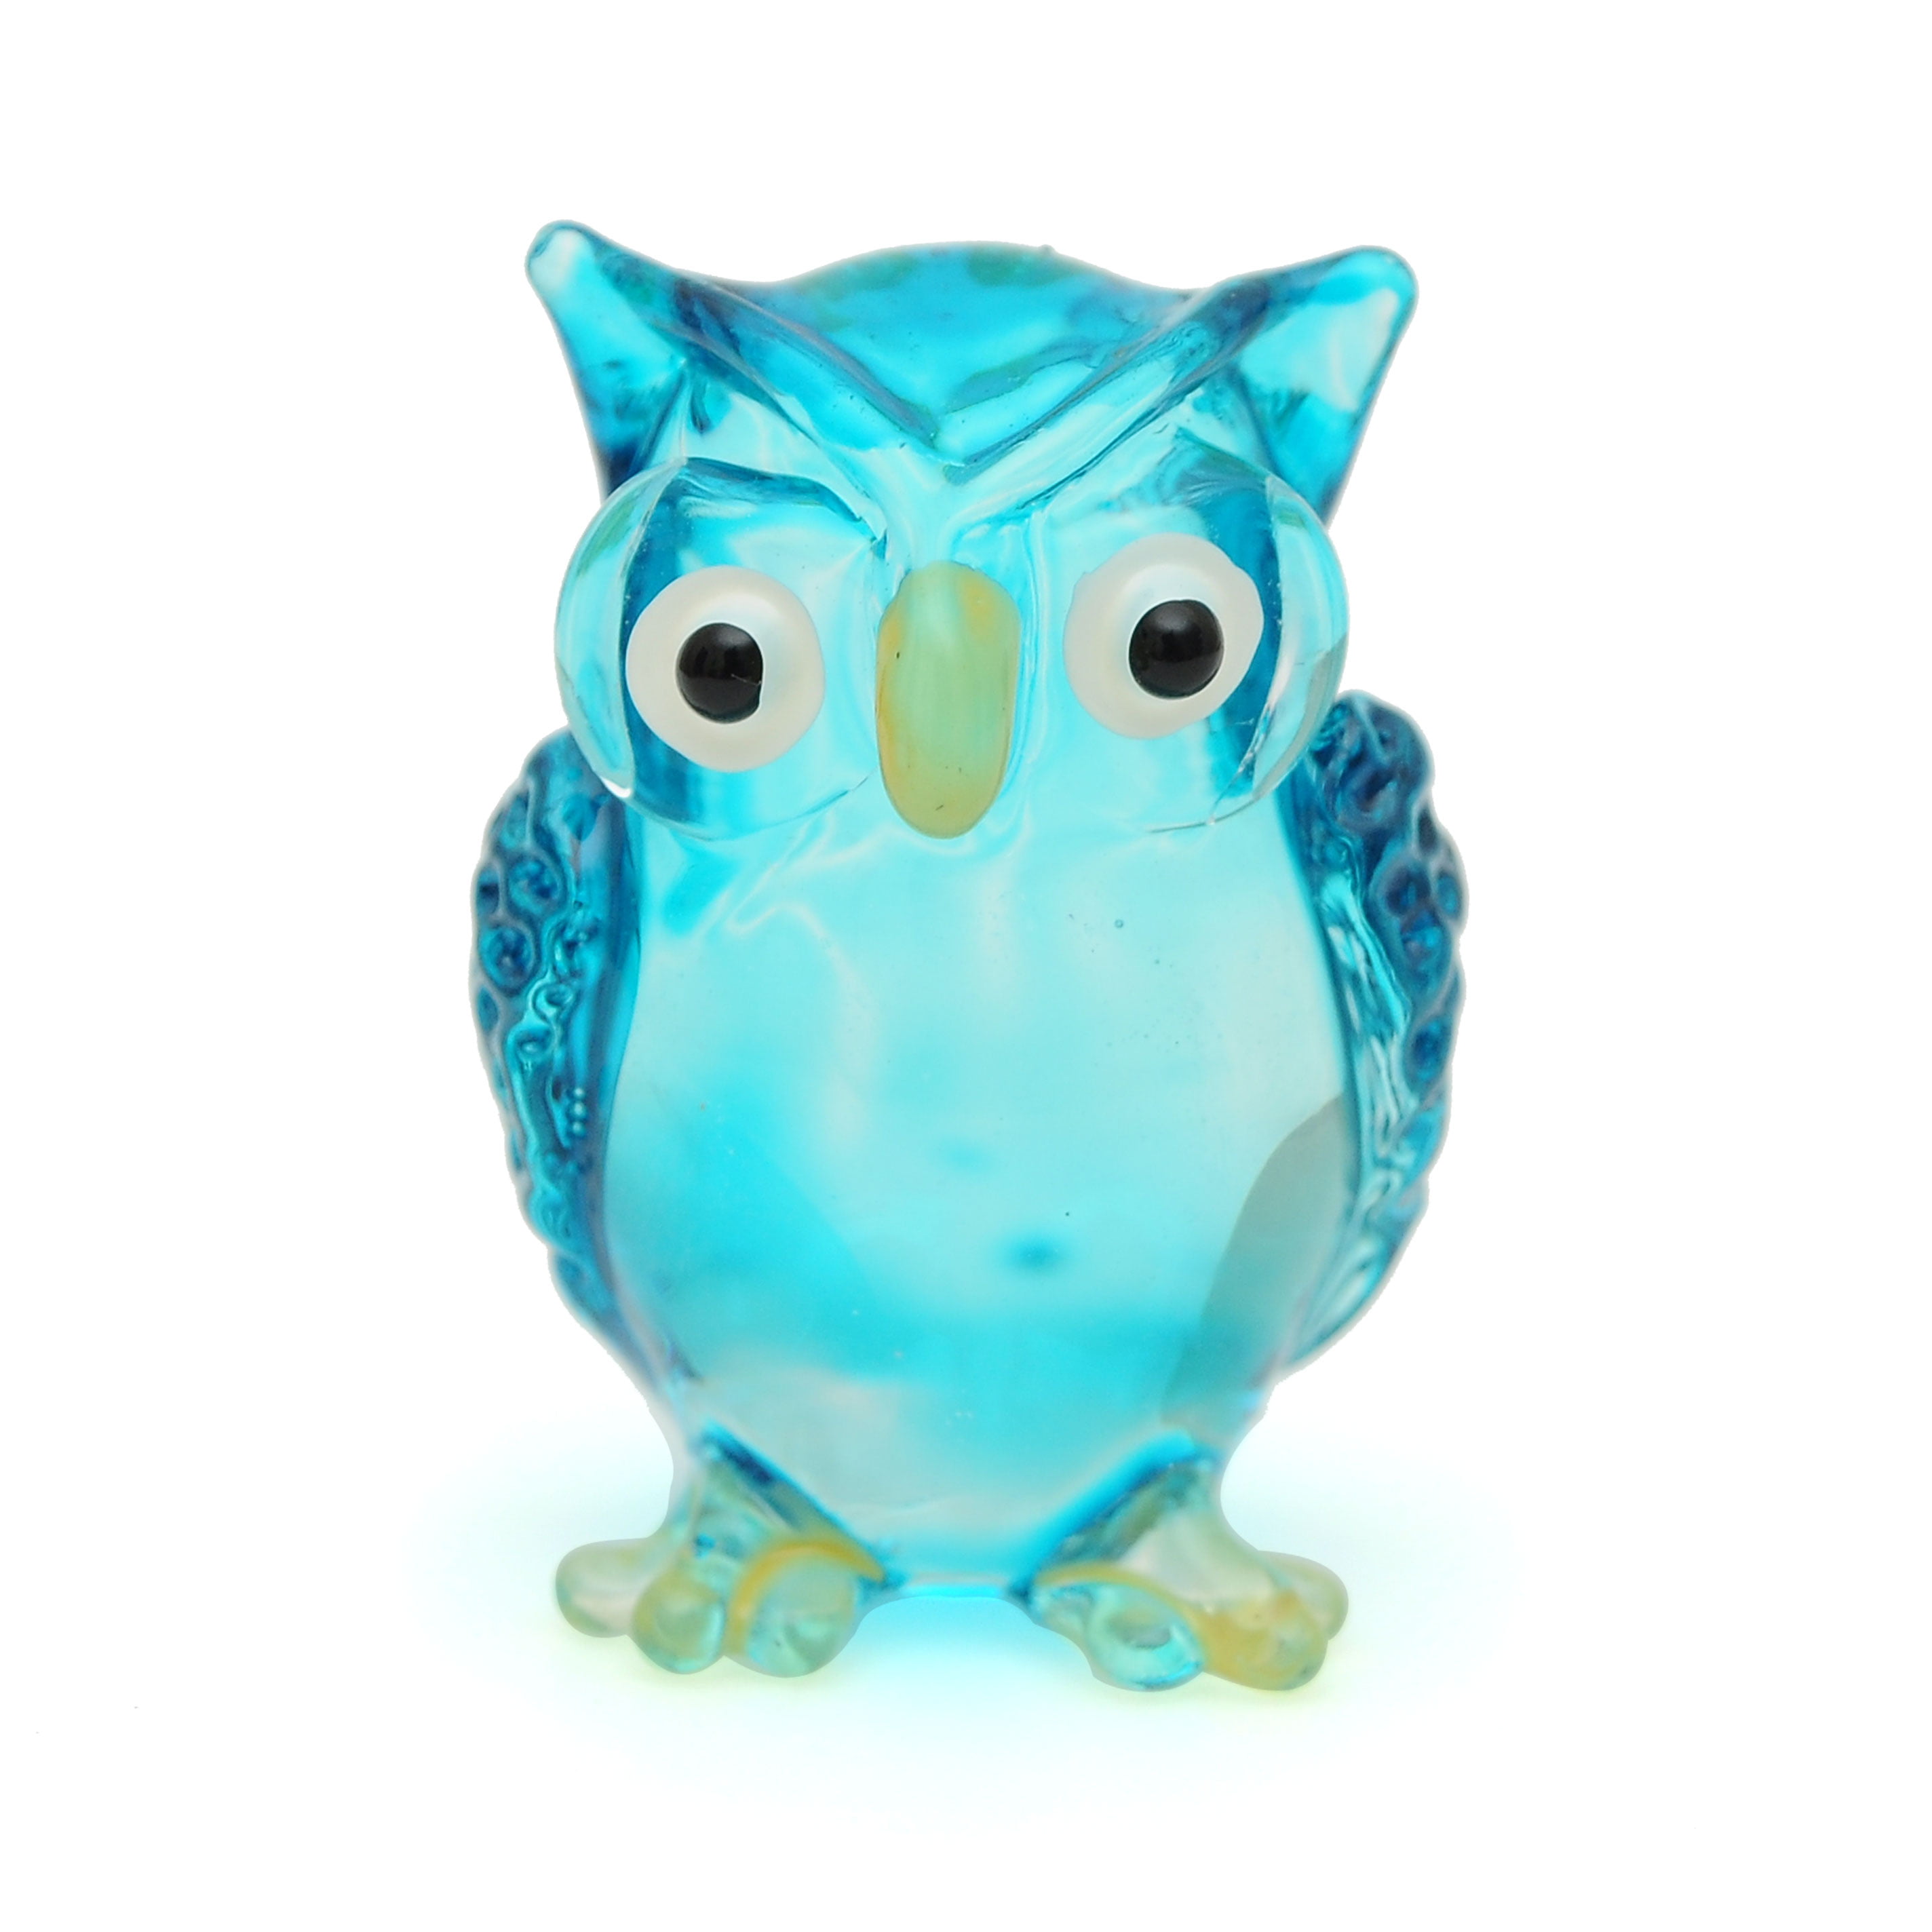 HAND PAINTED   COBANEE415 Barred Owl BLOWN GLASS ANIMAL ORNAMENT 